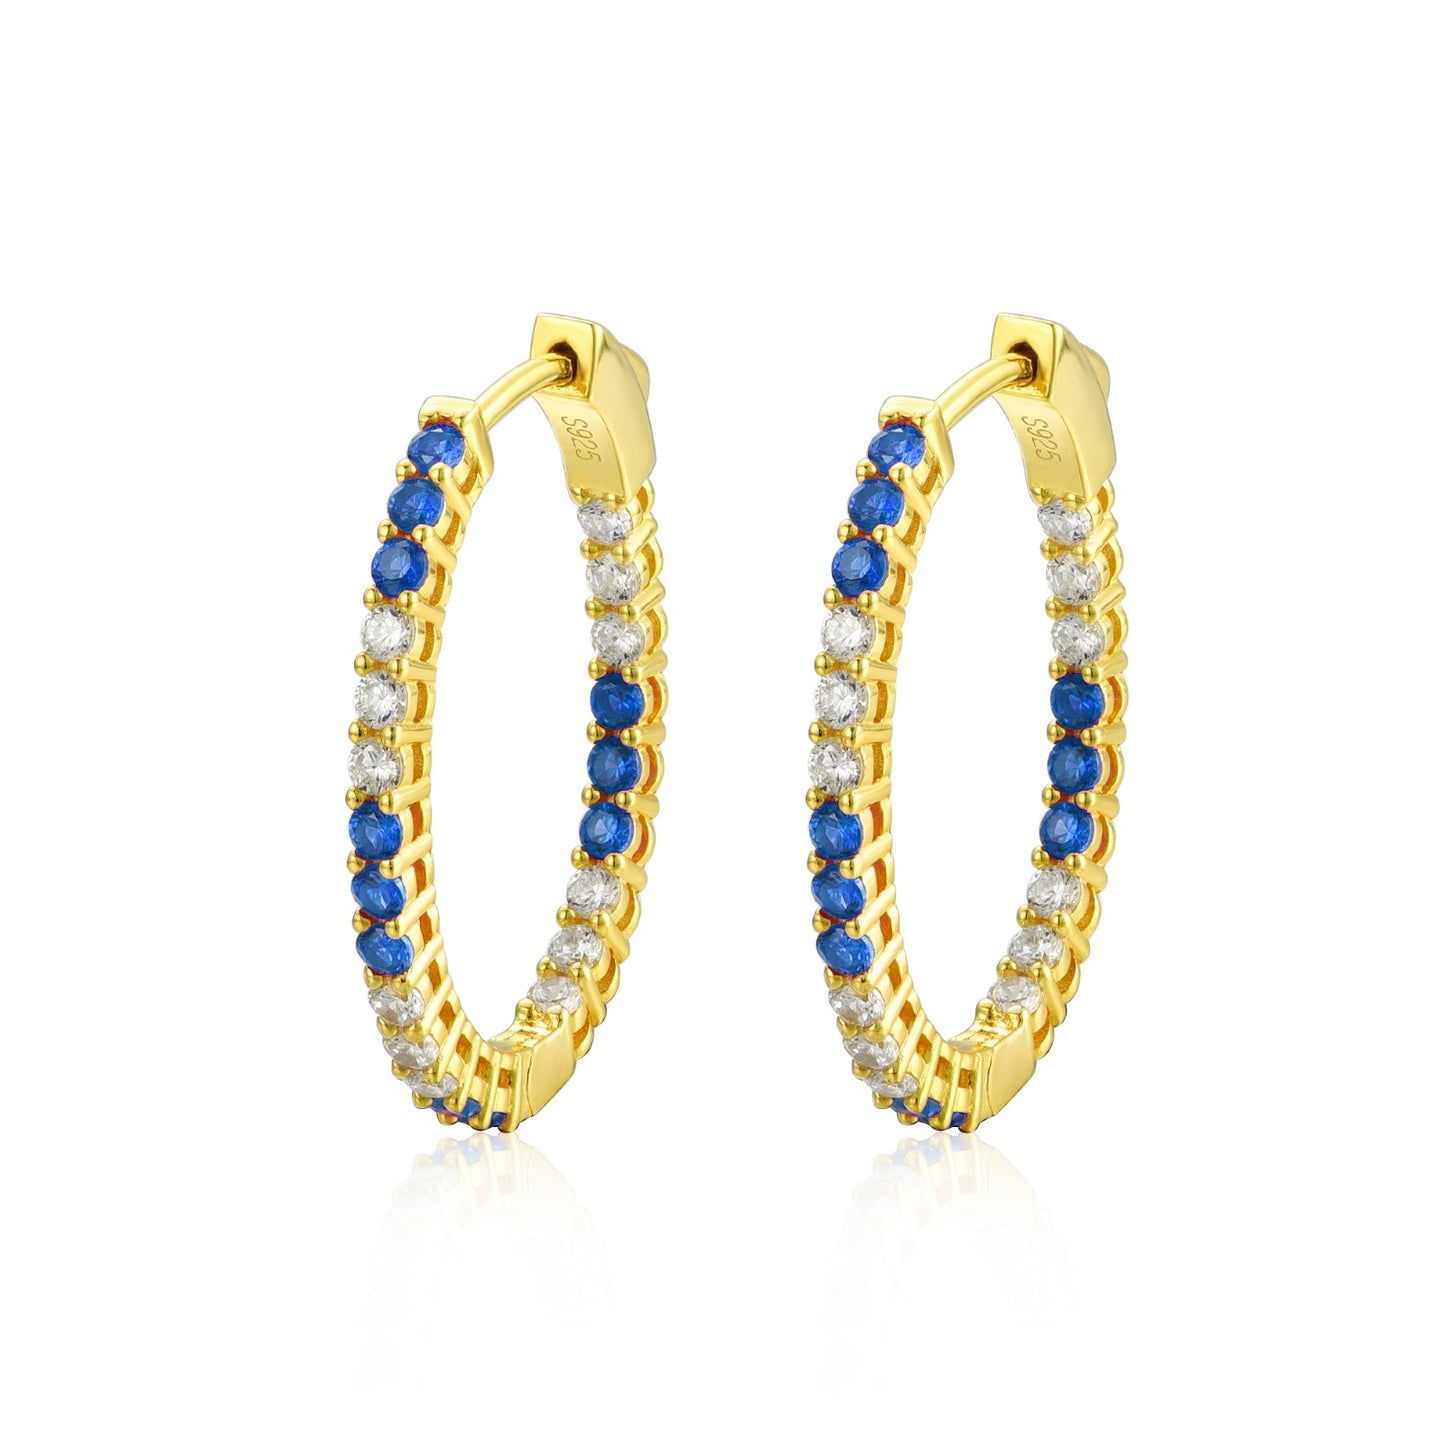 Oval Uniquely Colored Hoops